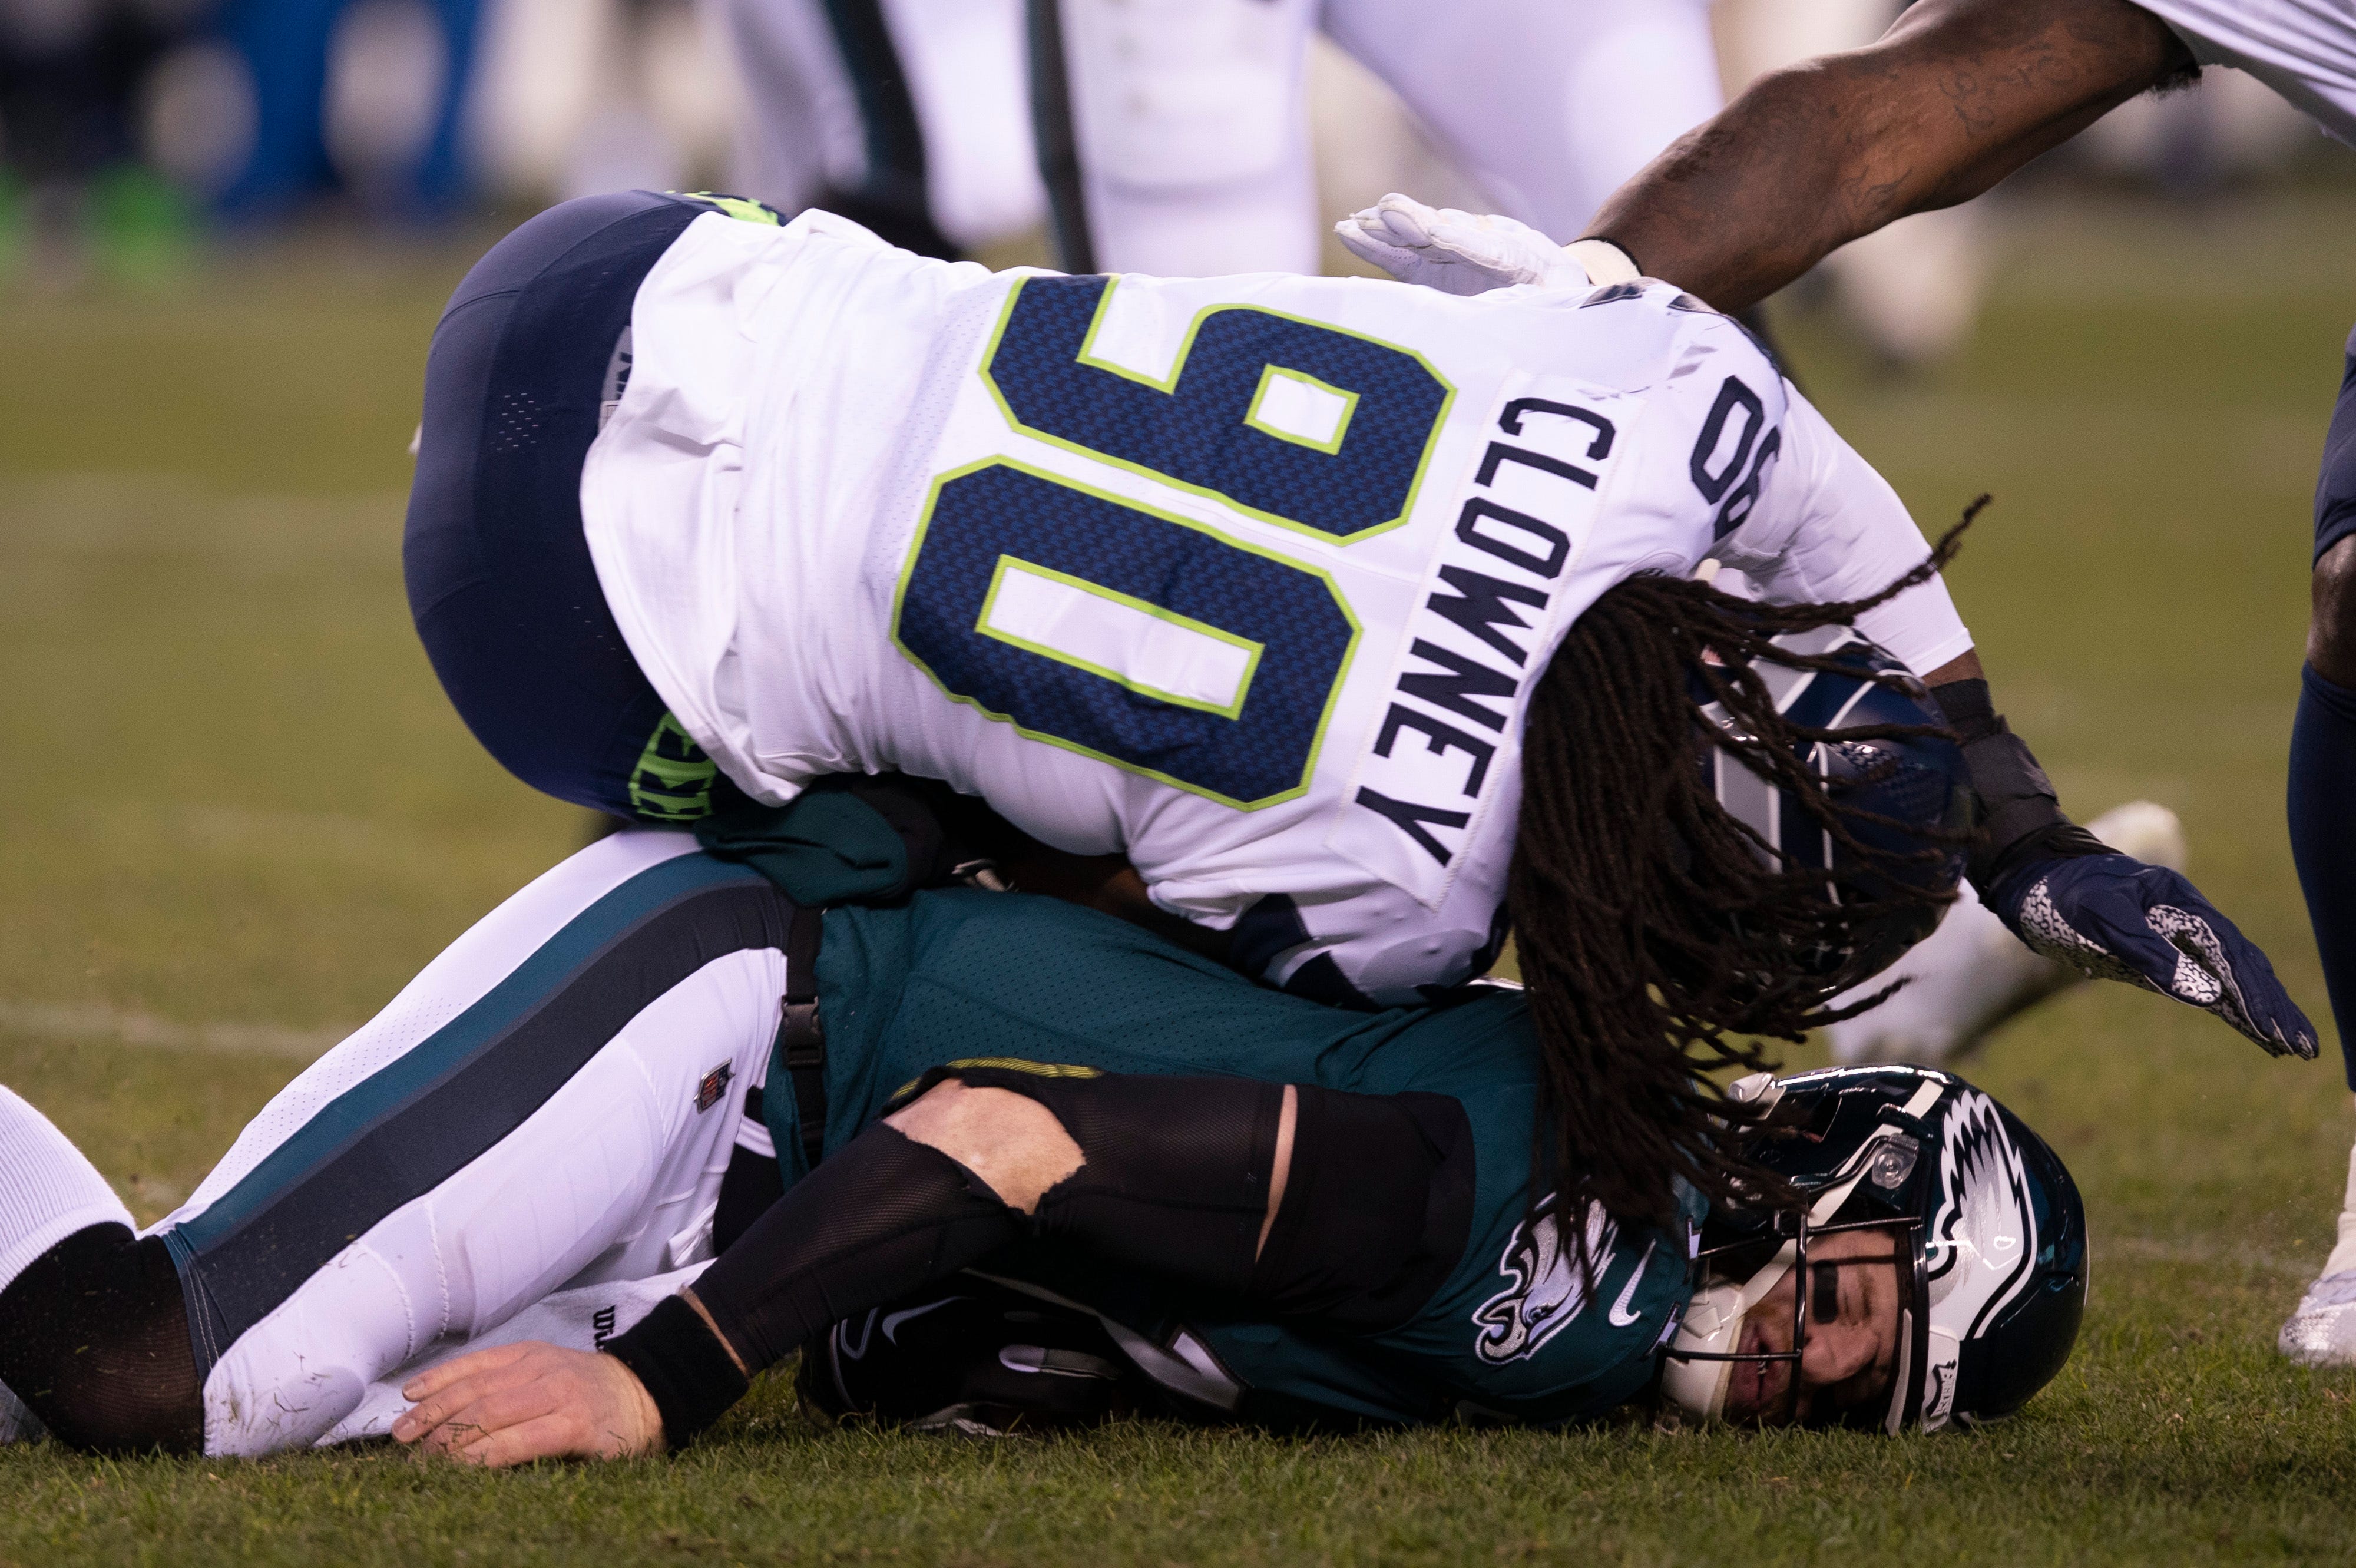 Jadeveon Clowney Seahawks-Packers NFC Divisional Playoff game